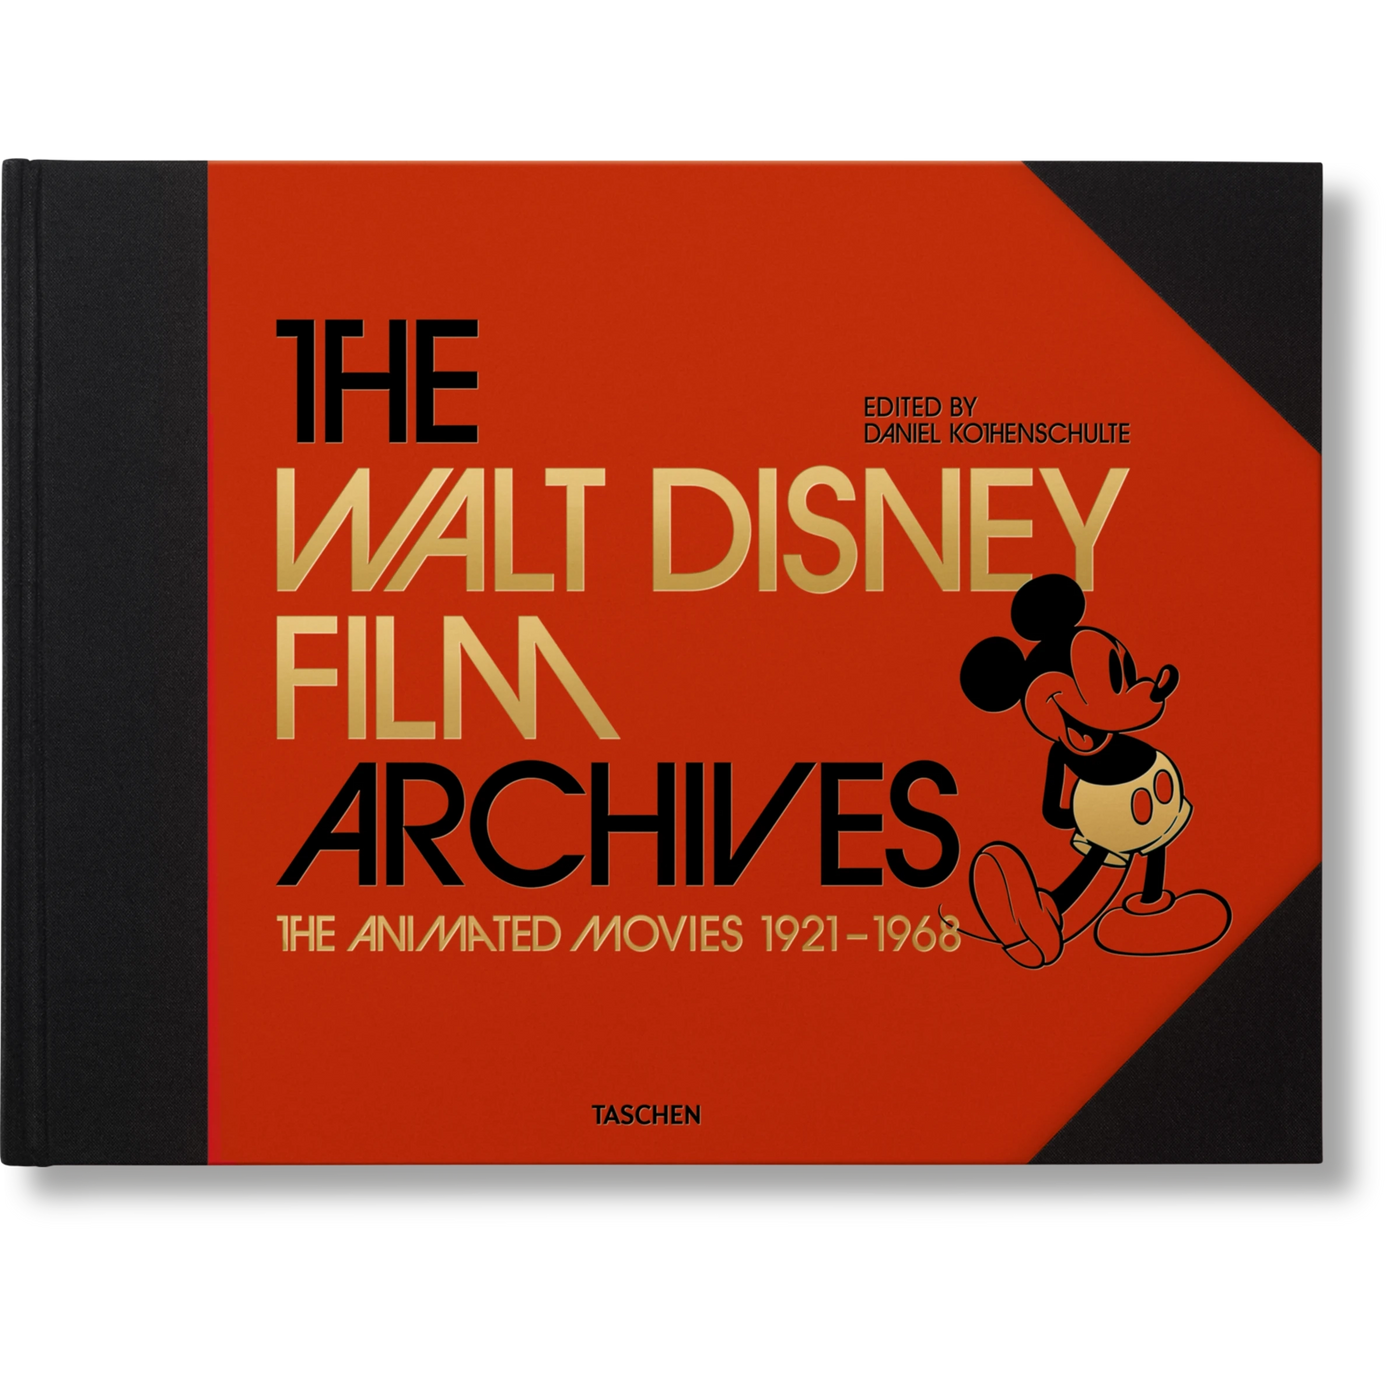 The Walt Disney Film Archives, The Animated Movies 1921-1968